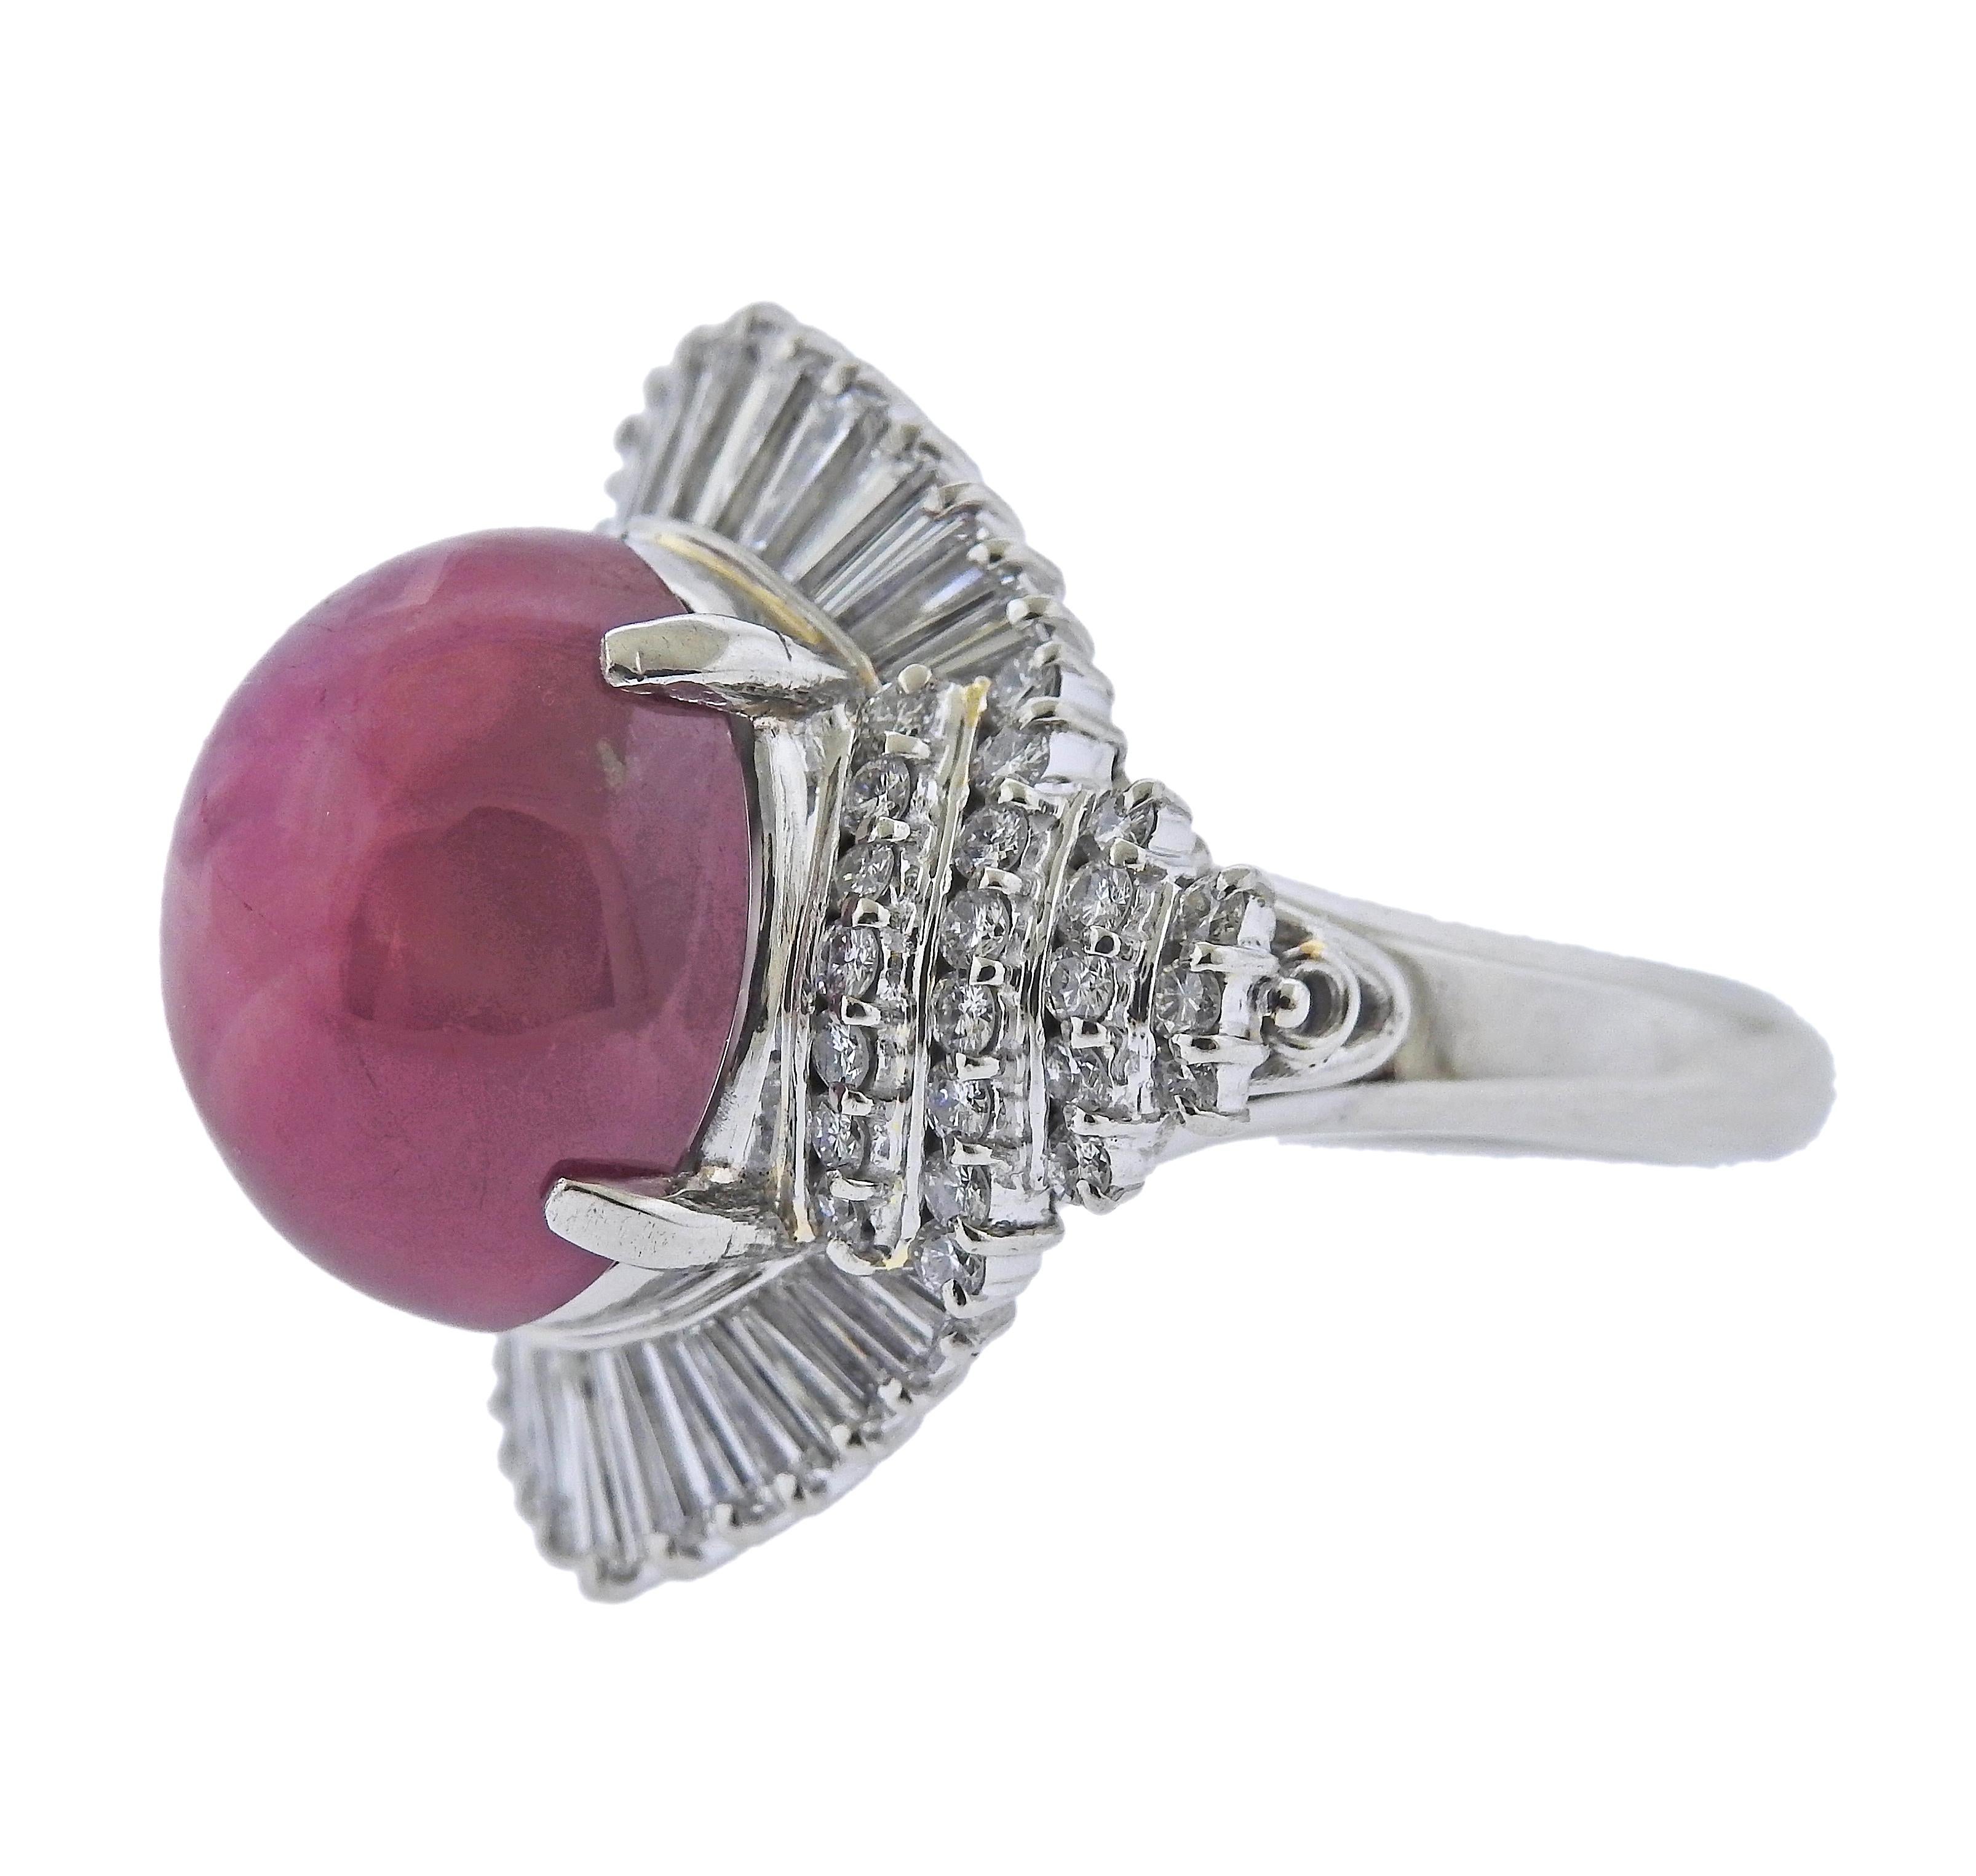 Platinum cocktail ring, with center 4.34ct ruby cabochon ( stone measures approx. 13.7 x 11.5 x 9.5mm). Surrounded with 1.44ctw in diamonds. Ring size - 6.5, ring top - 22mm x 21mm. Marked: BO 4.34, Pt900, 1.44. Weight - 15.8 grams.